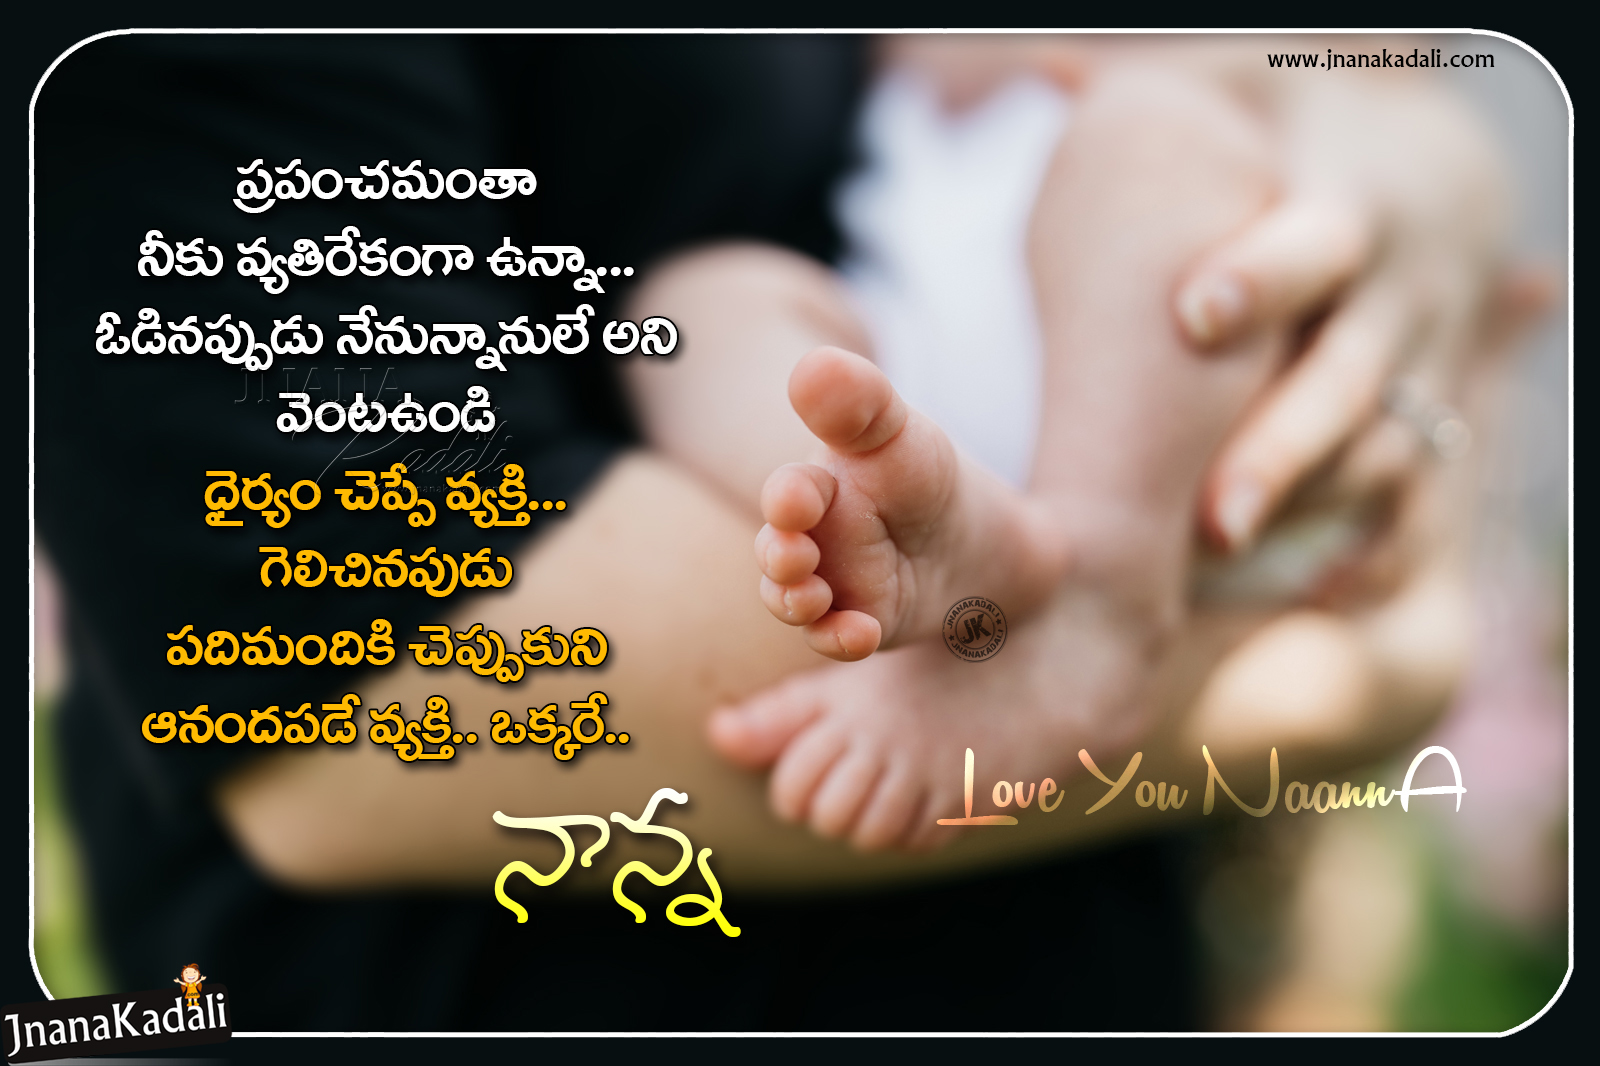 Heart Touching Father Loving Quotes In Telugu Father And Baby Hd Wallpapers Free Download Jnana Kadali Com Telugu Quotes English Quotes Hindi Quotes Tamil Quotes Dharmasandehalu